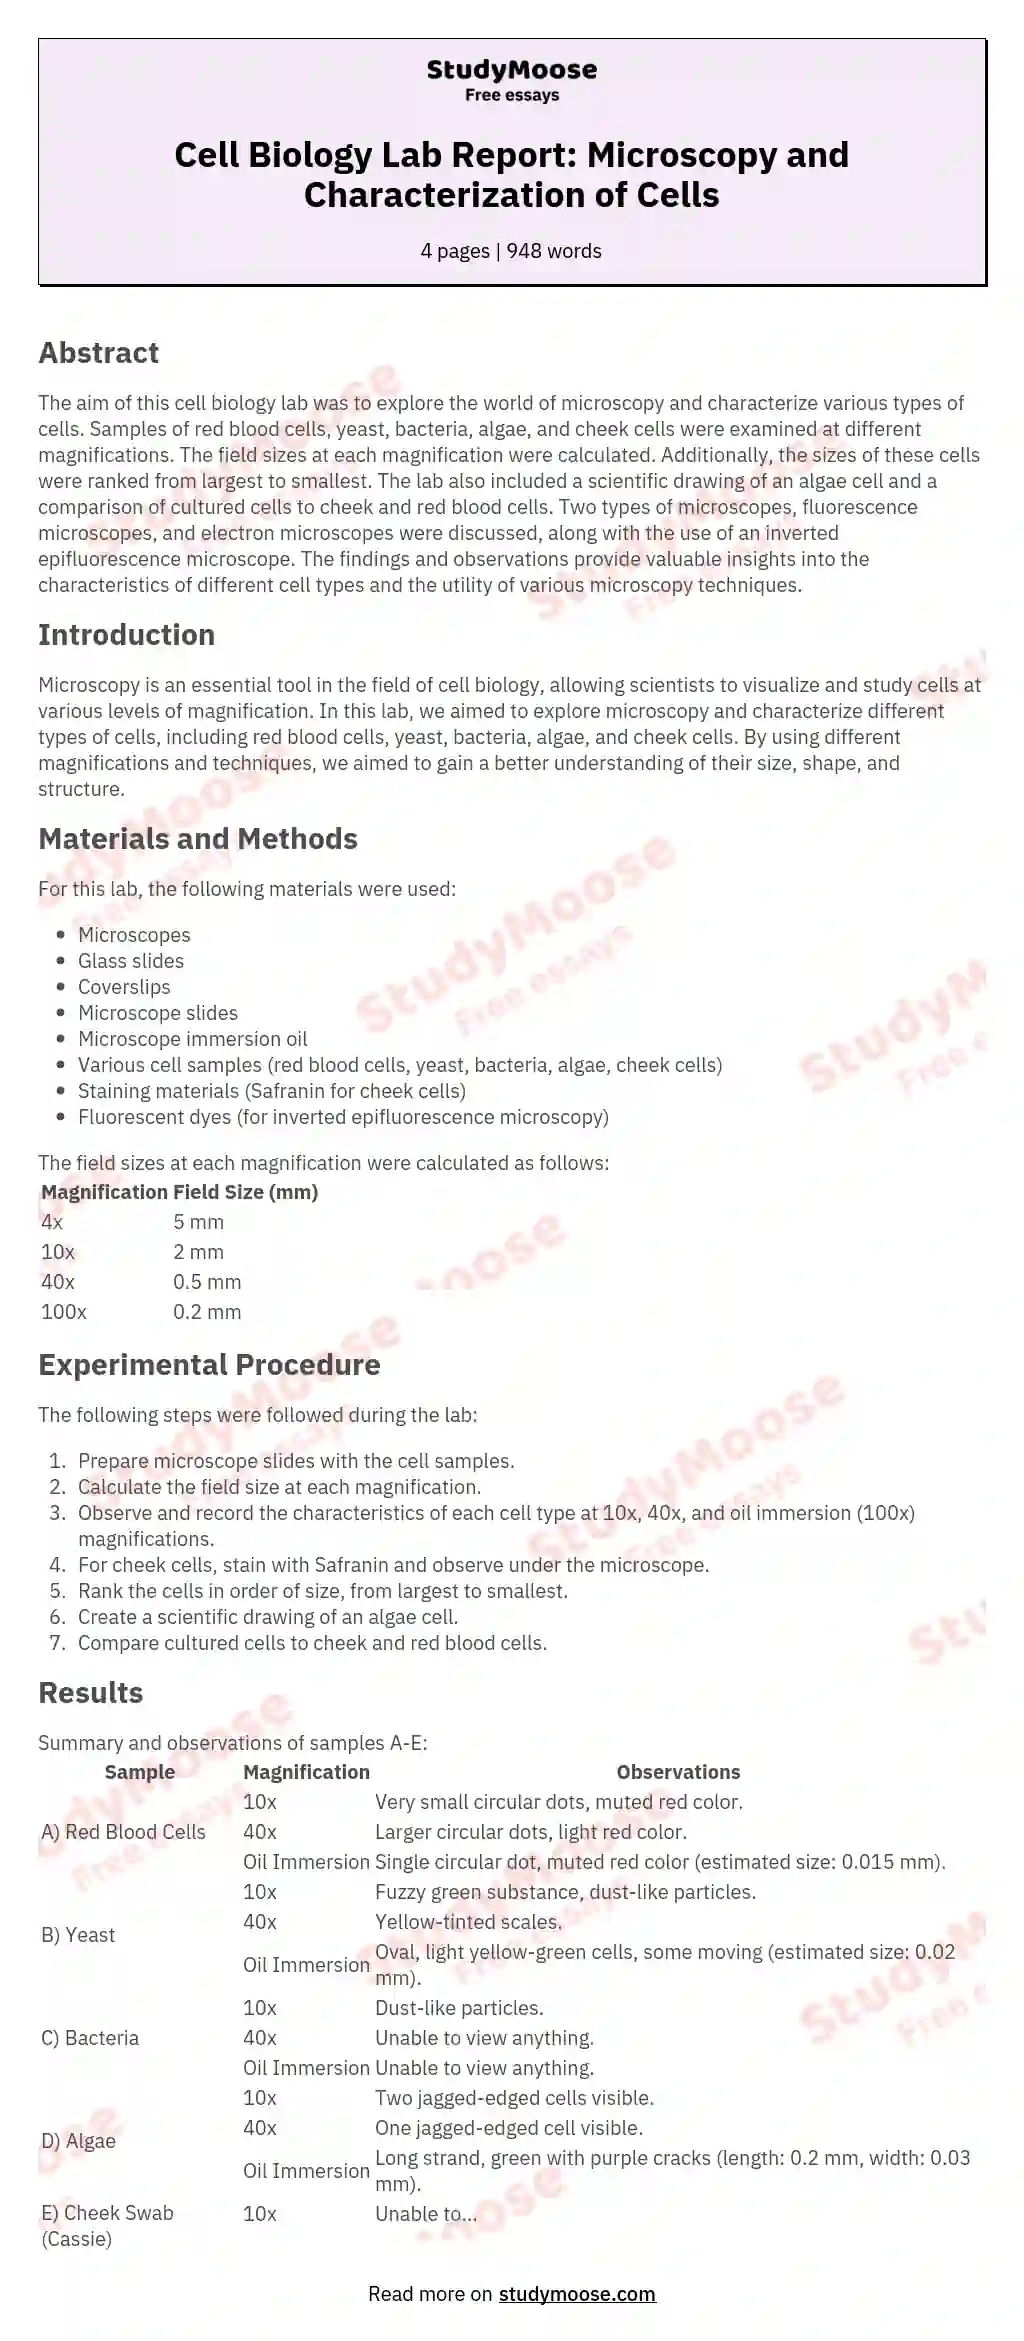 Cell Biology Lab Report: Microscopy and Characterization of Cells essay